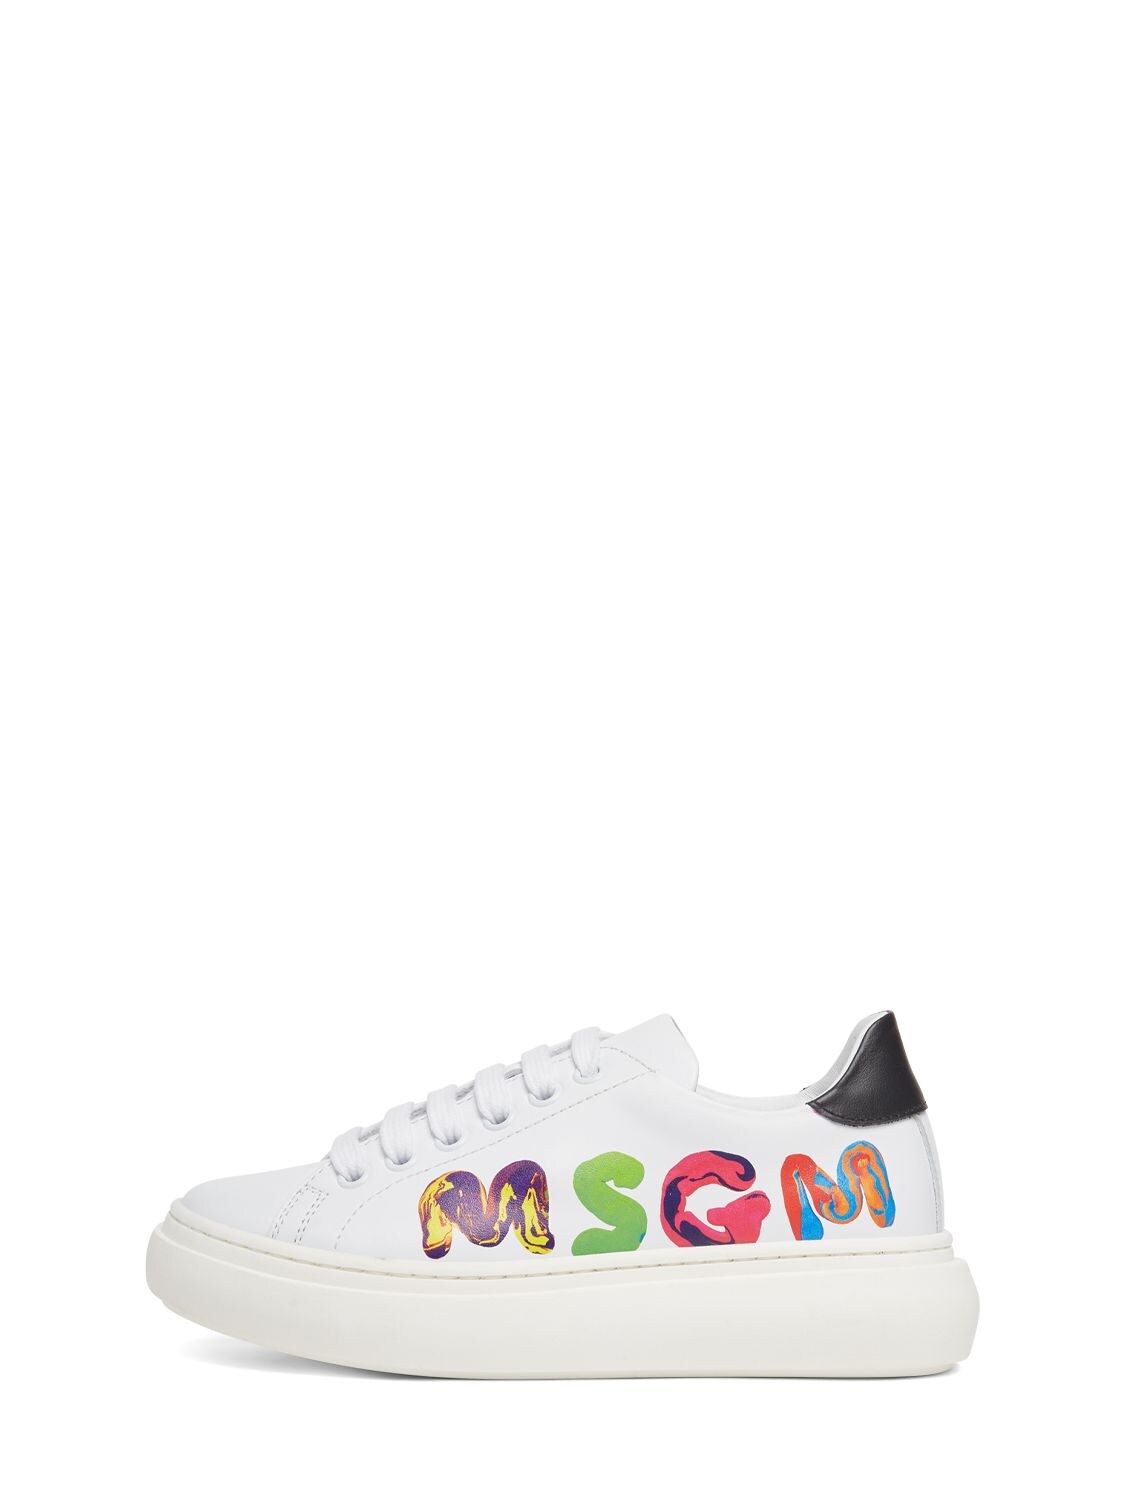 Msgm Kids' Logo Print Leather Lace-up Sneakers In White